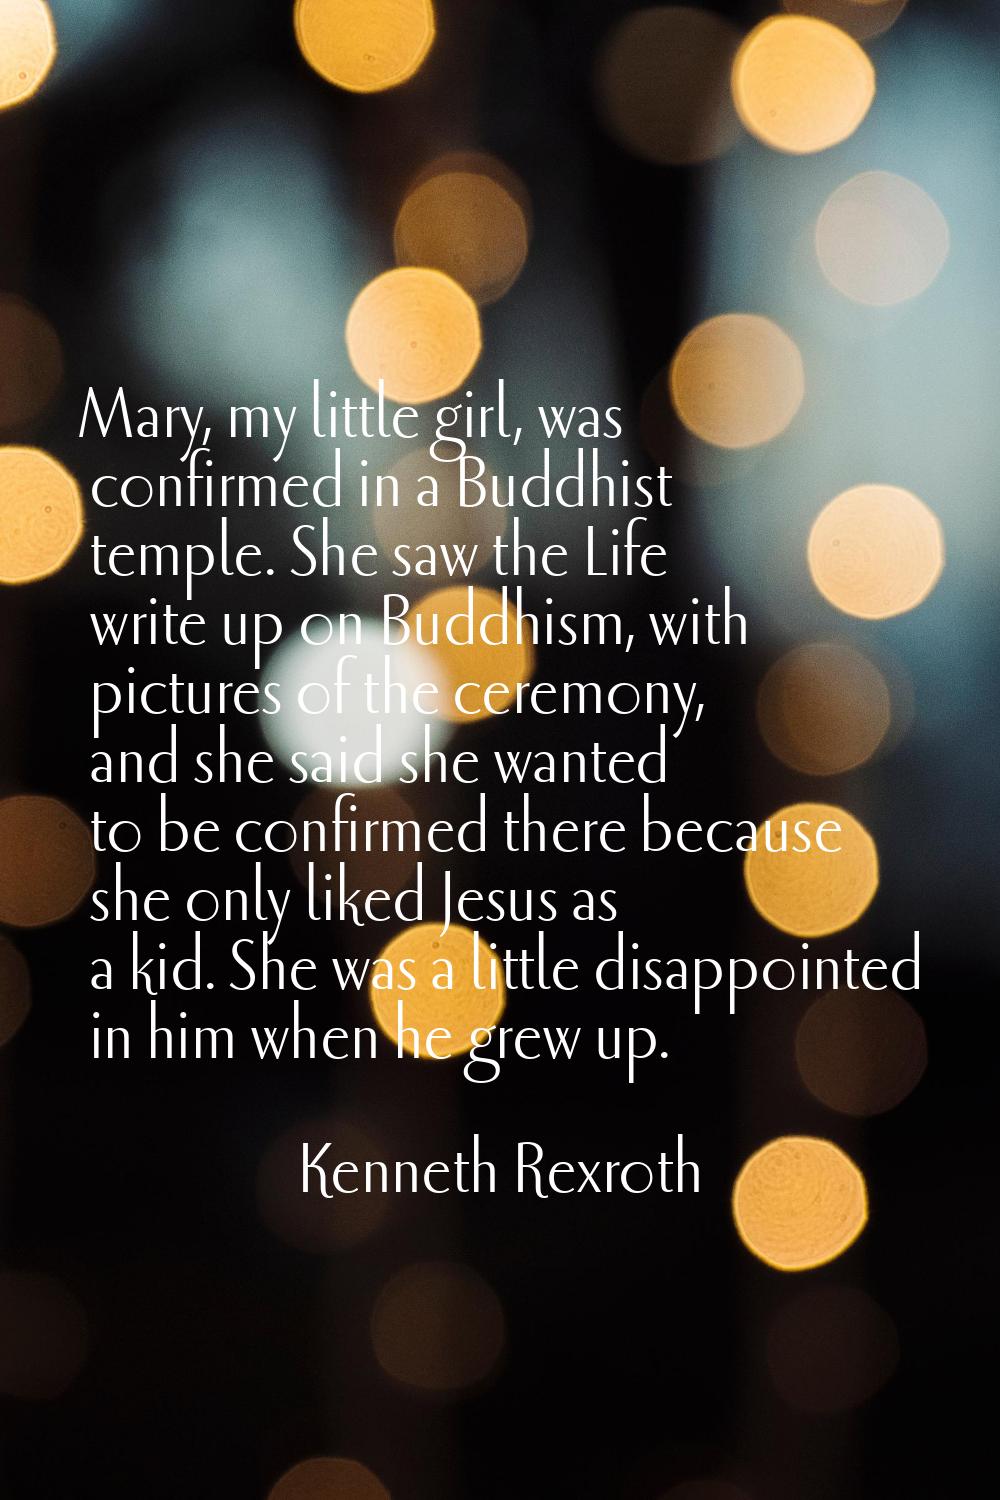 Mary, my little girl, was confirmed in a Buddhist temple. She saw the Life write up on Buddhism, wi